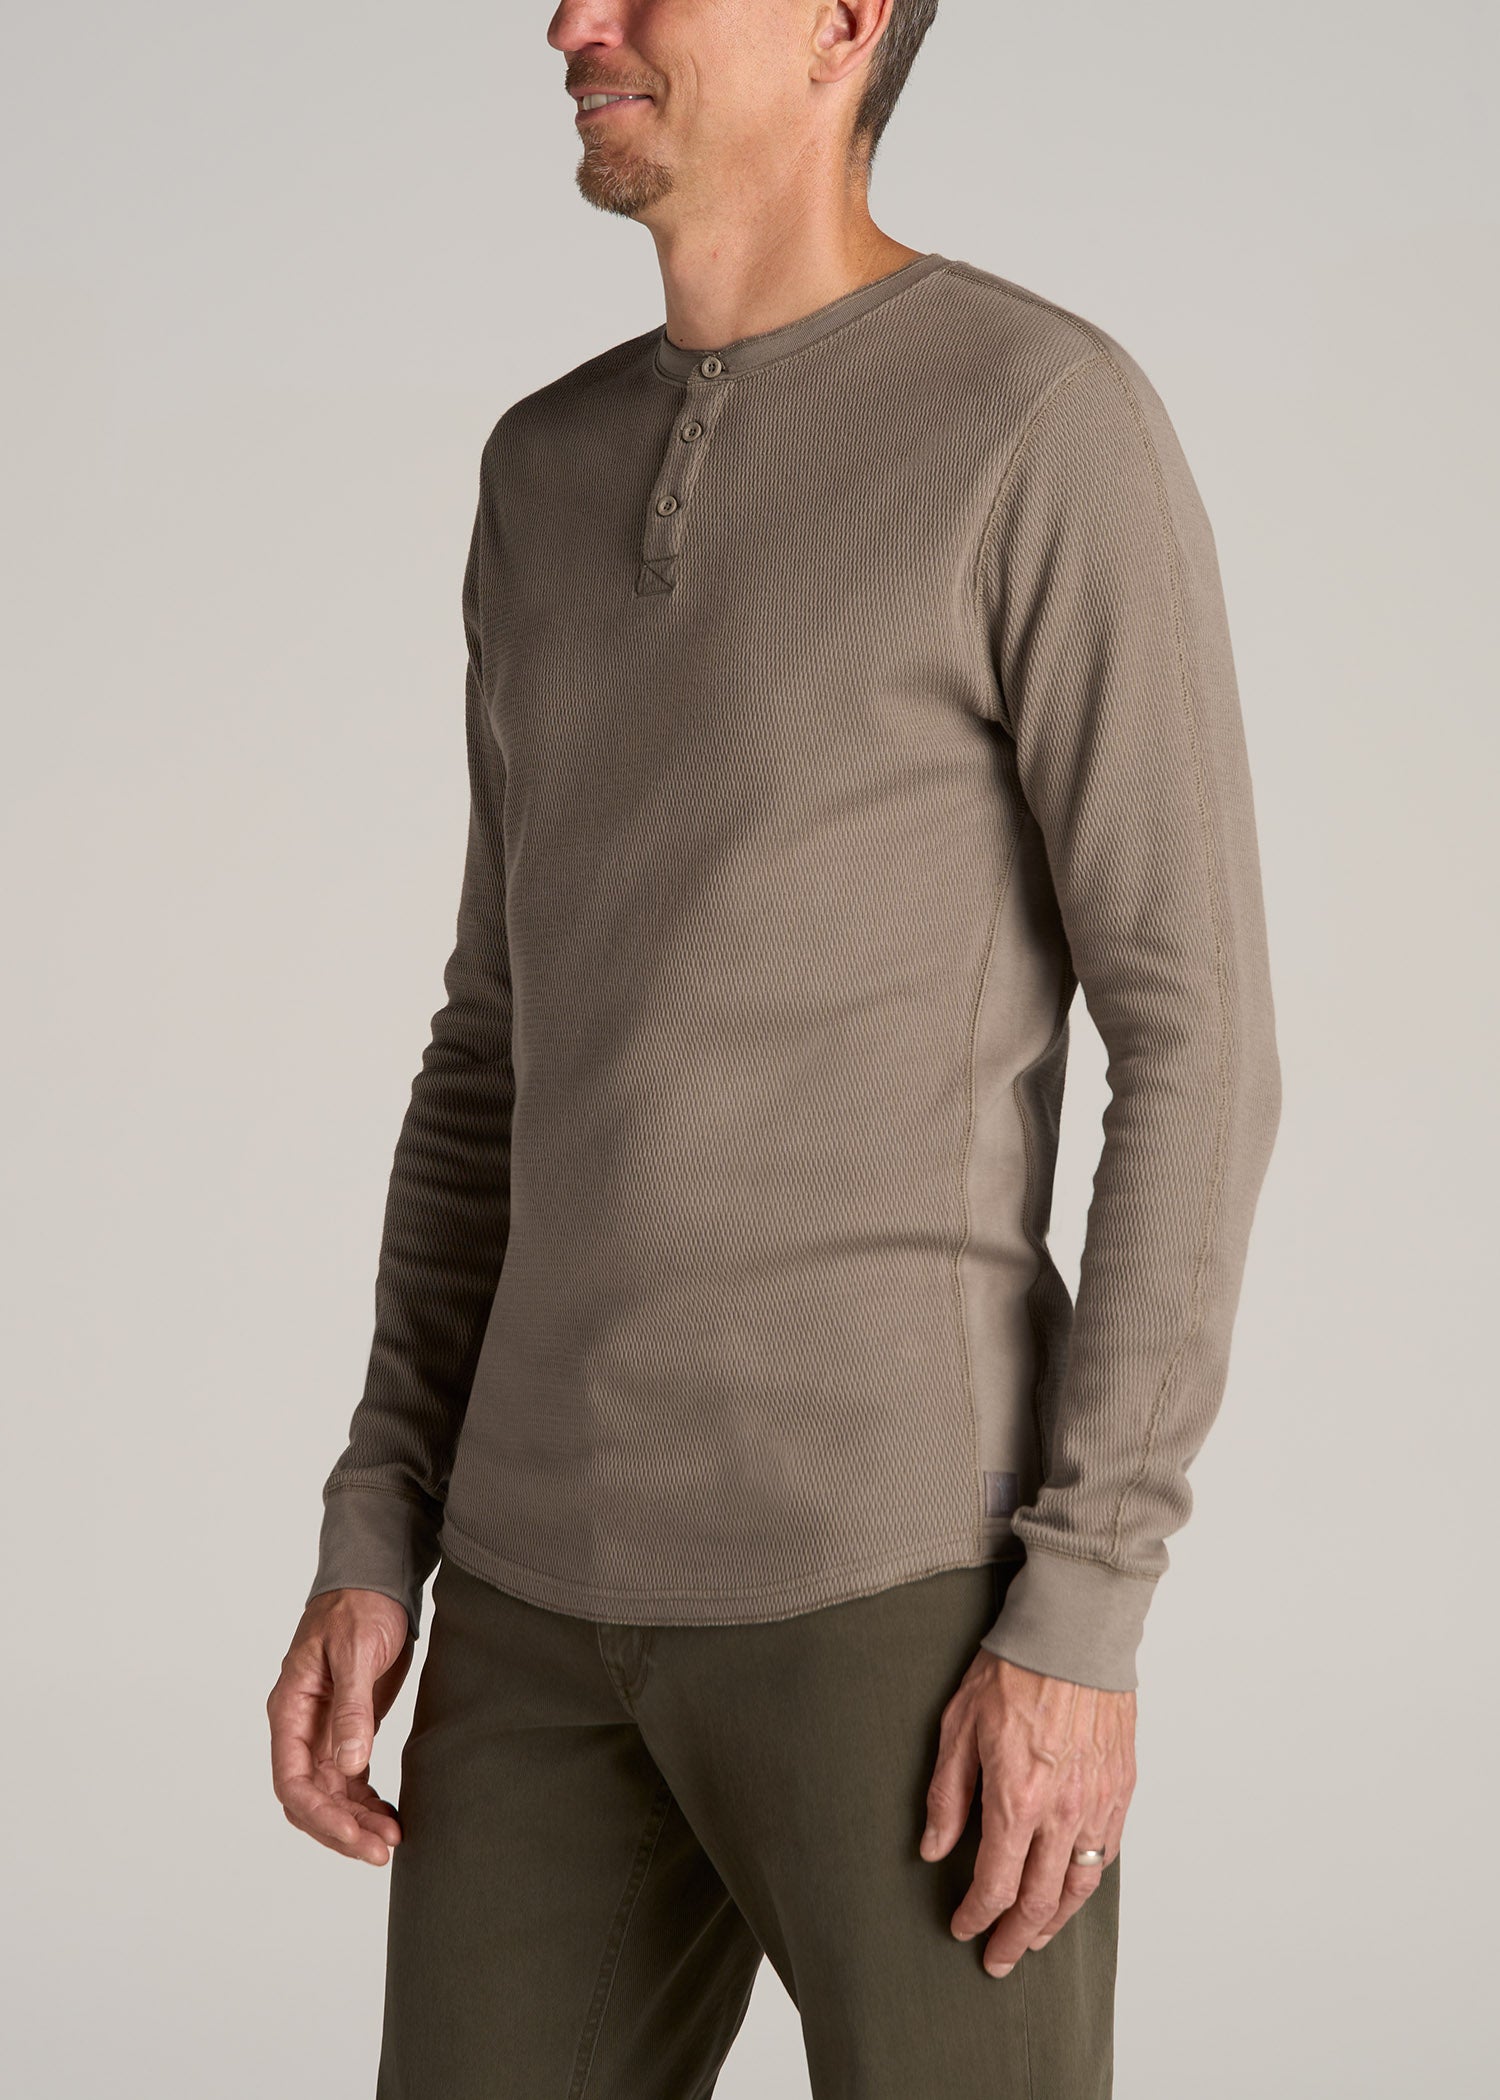 Double Honeycomb Thermal Long-Sleeve Henley Shirt for Tall Men in Dark Sand